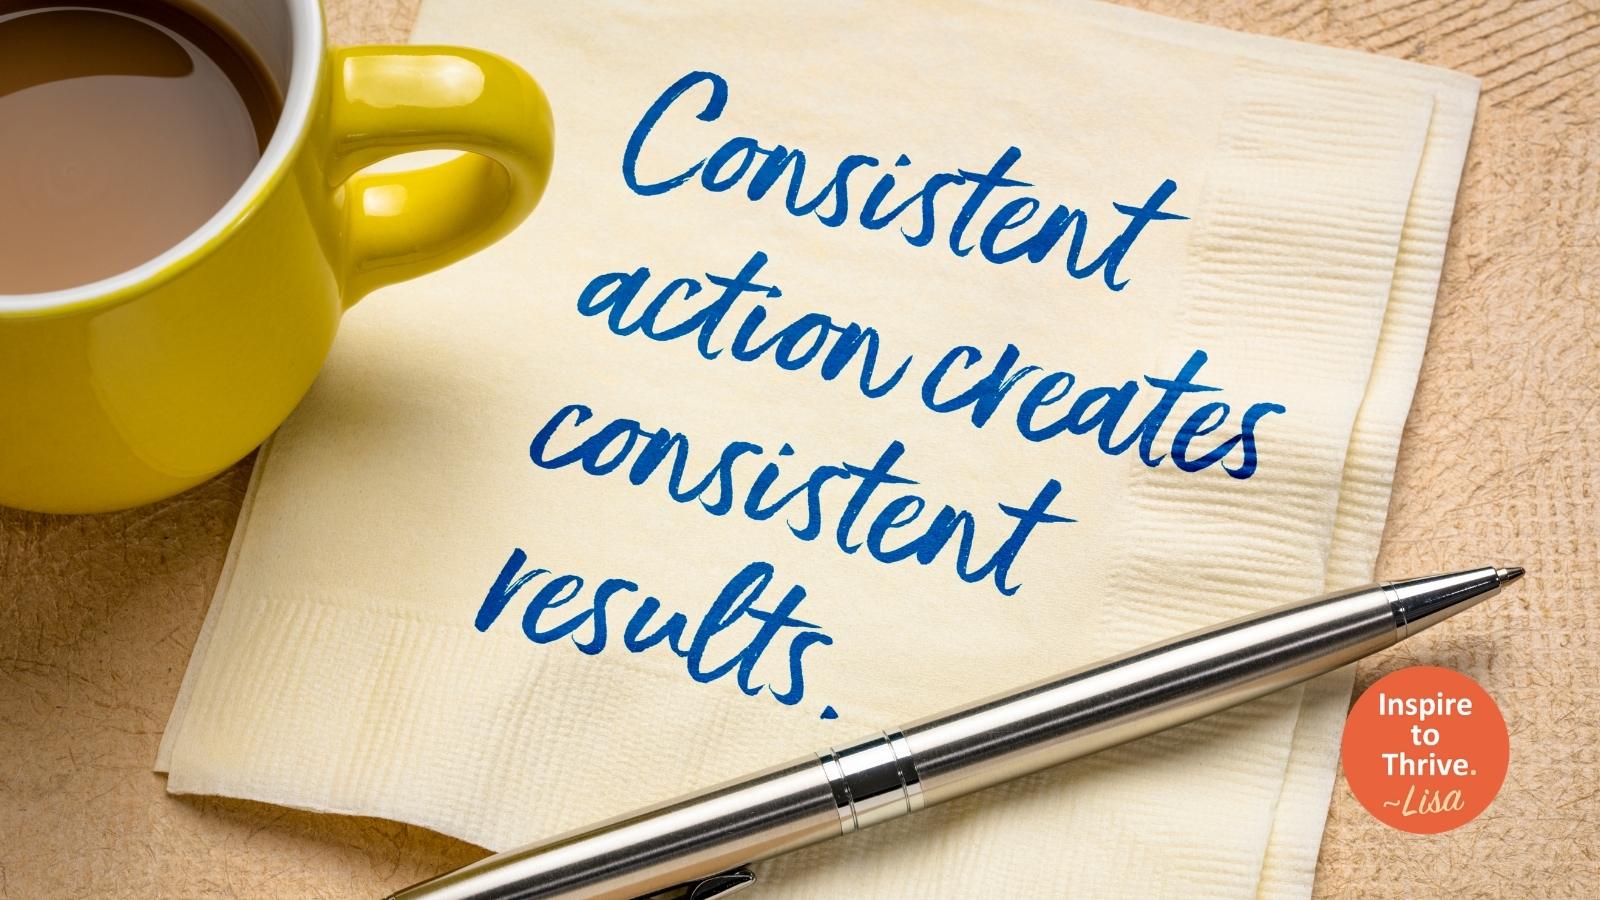 consistency in marketing your small business